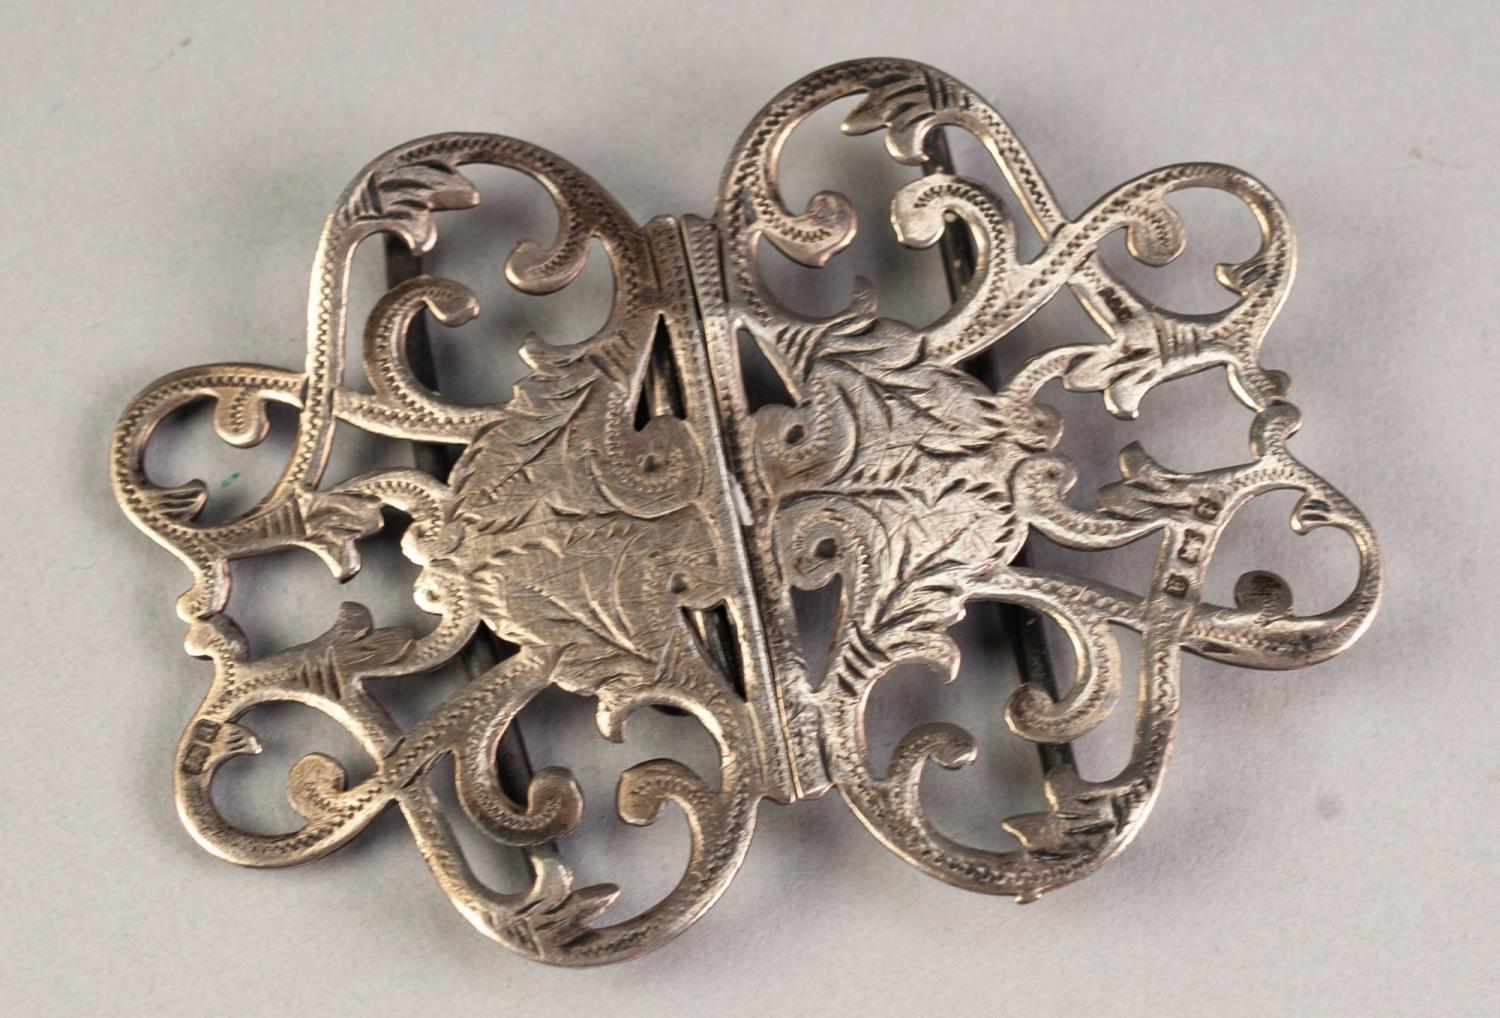 LATE VICTORIAN SILVER, LARGE, TWO-PART BUCKLE, pierced and engraved foliate scroll pattern, 3 1/